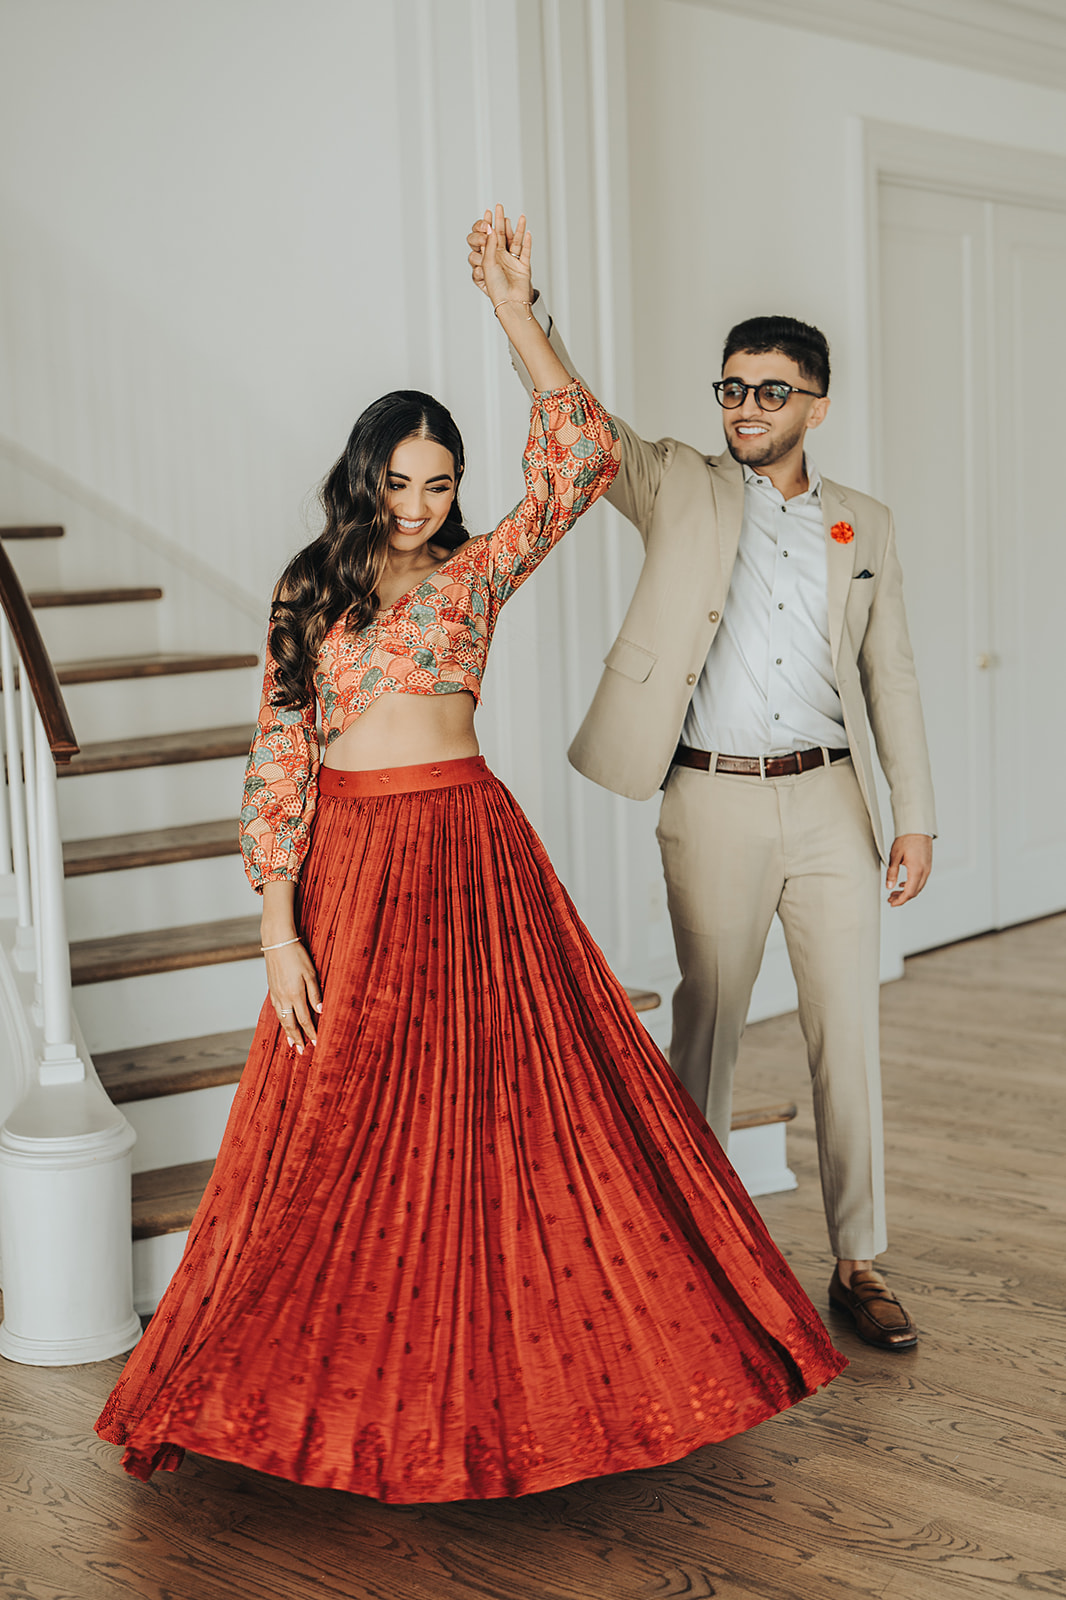 Houston engagement photo shoot at The Creative Chateau with Dharmi and Sai